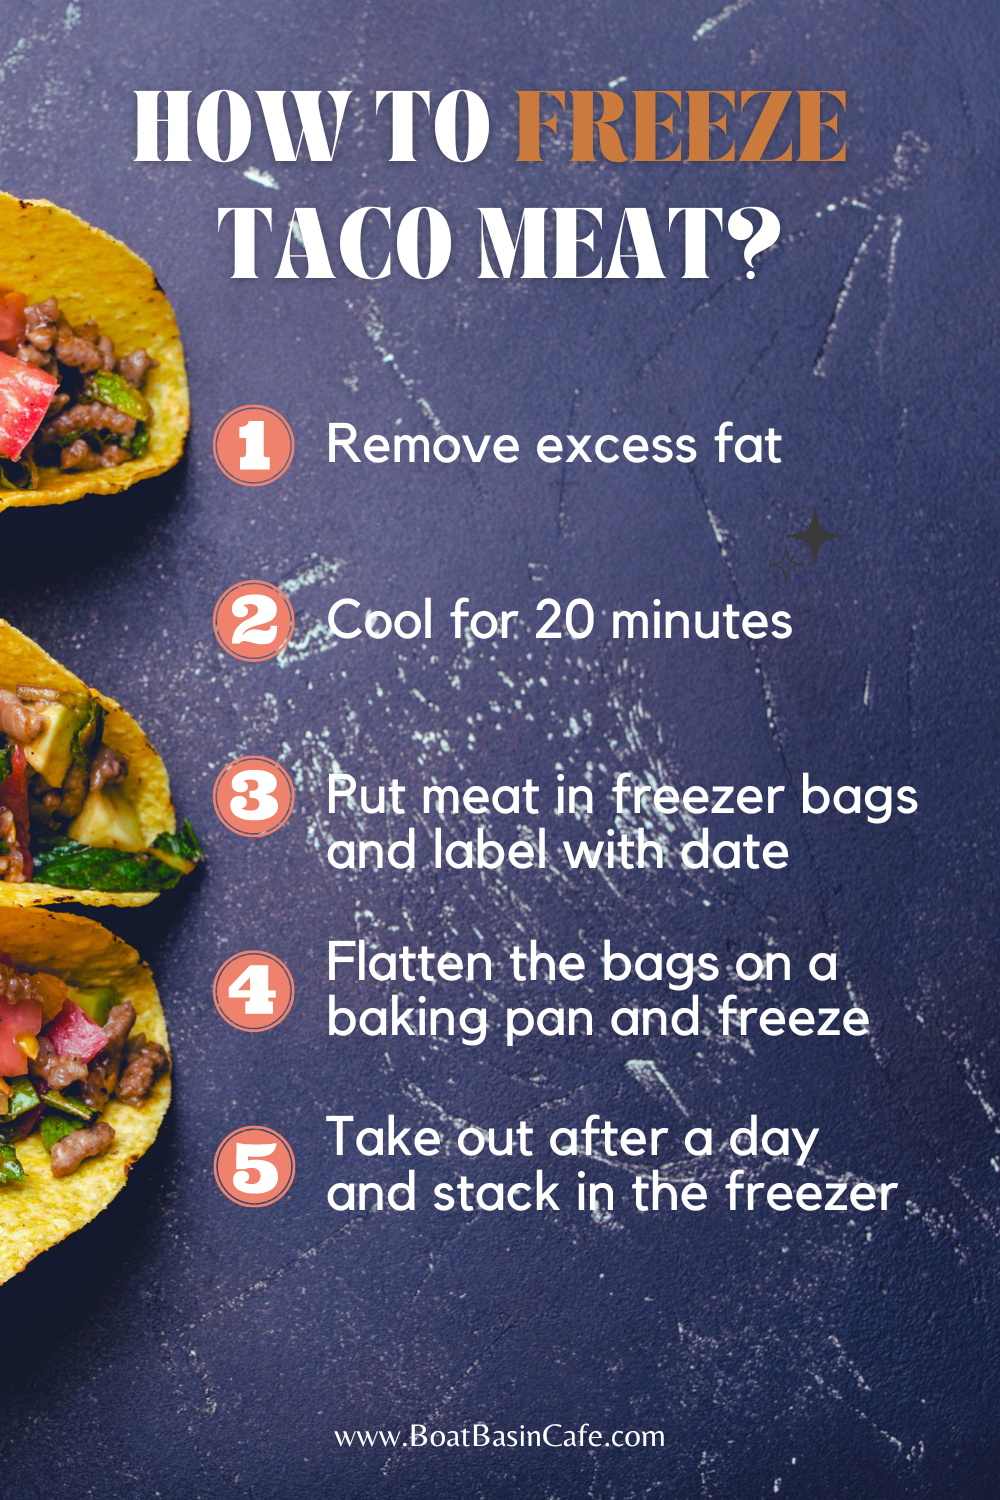 How To Freeze Taco Meat